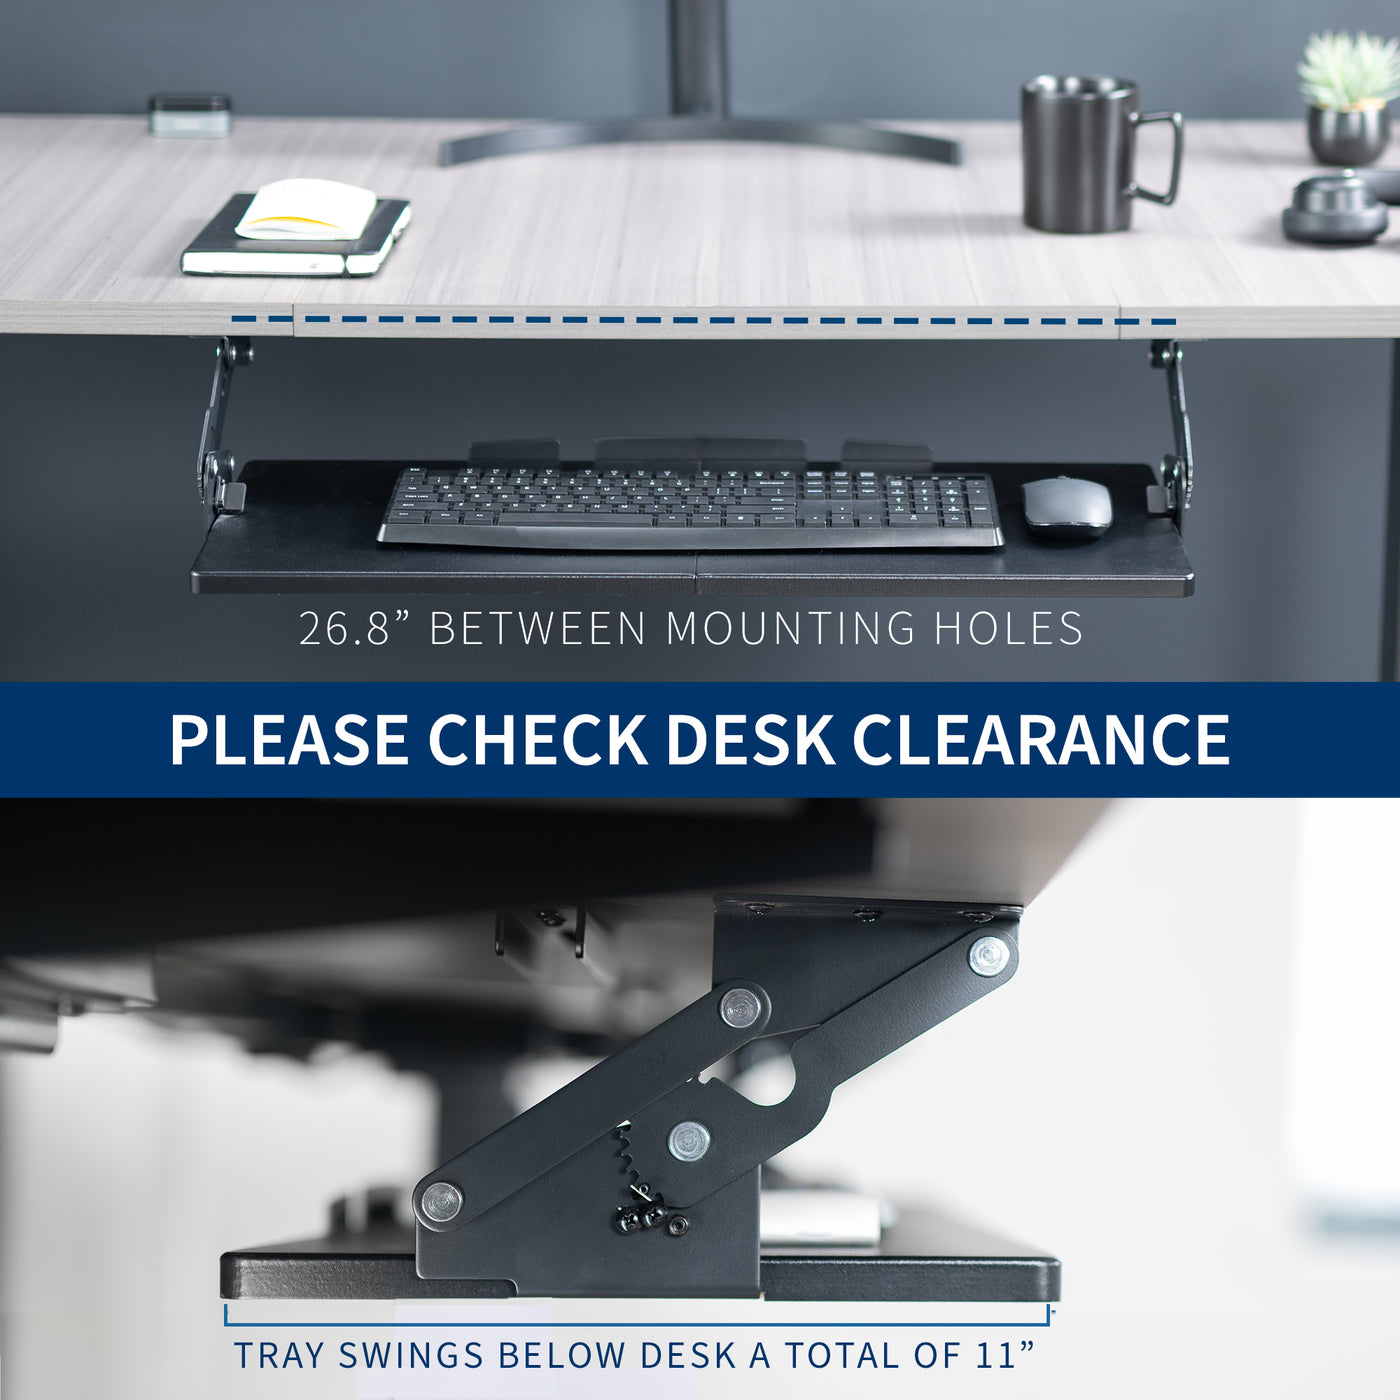 Double check for obstructions in the way of the sliding tray including objects like a support bar or control panel.